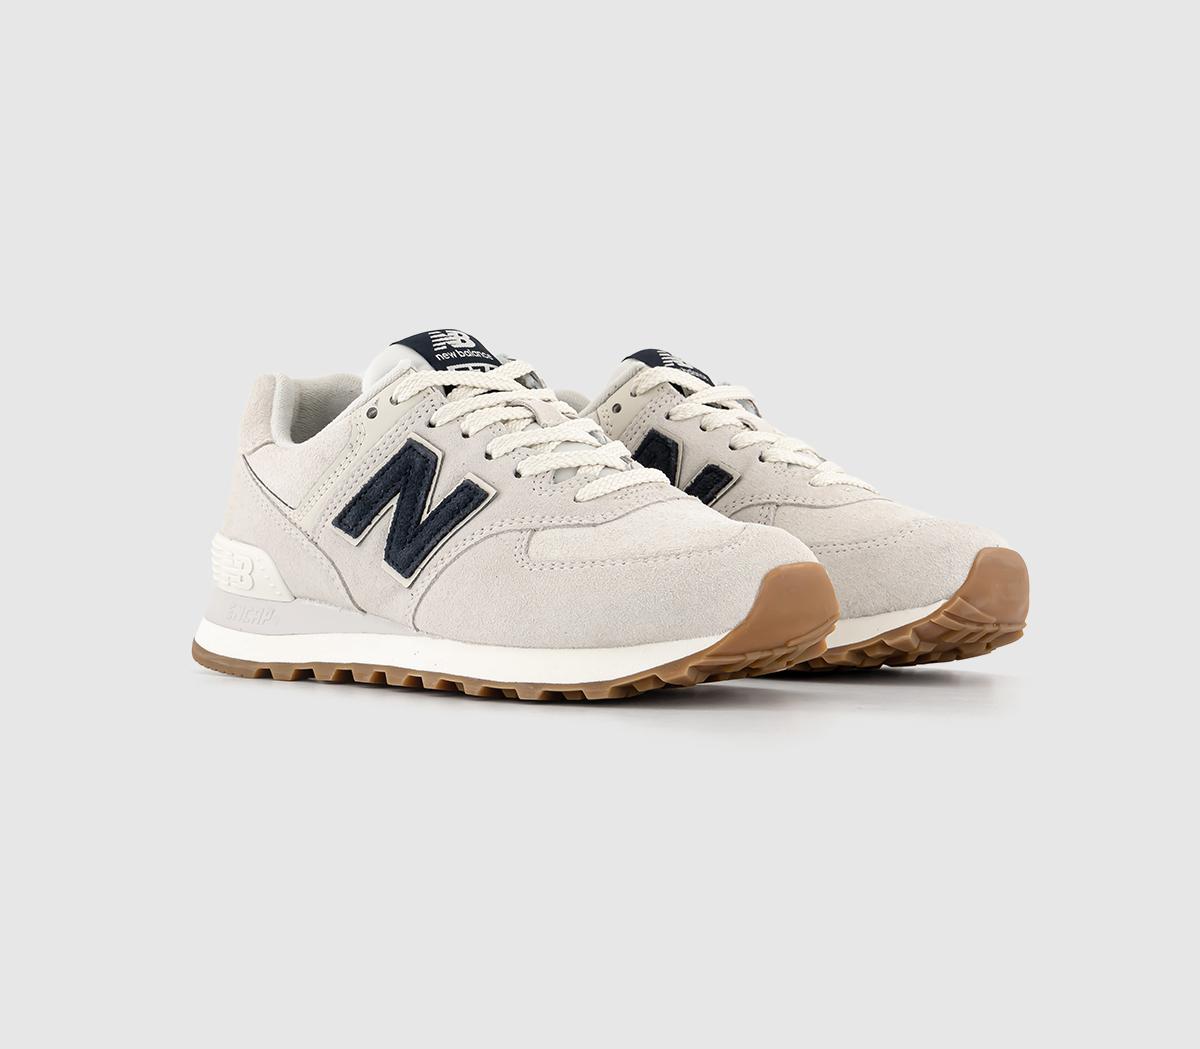 New Balance 574 Trainers Reflection Grey Navy, 7.5